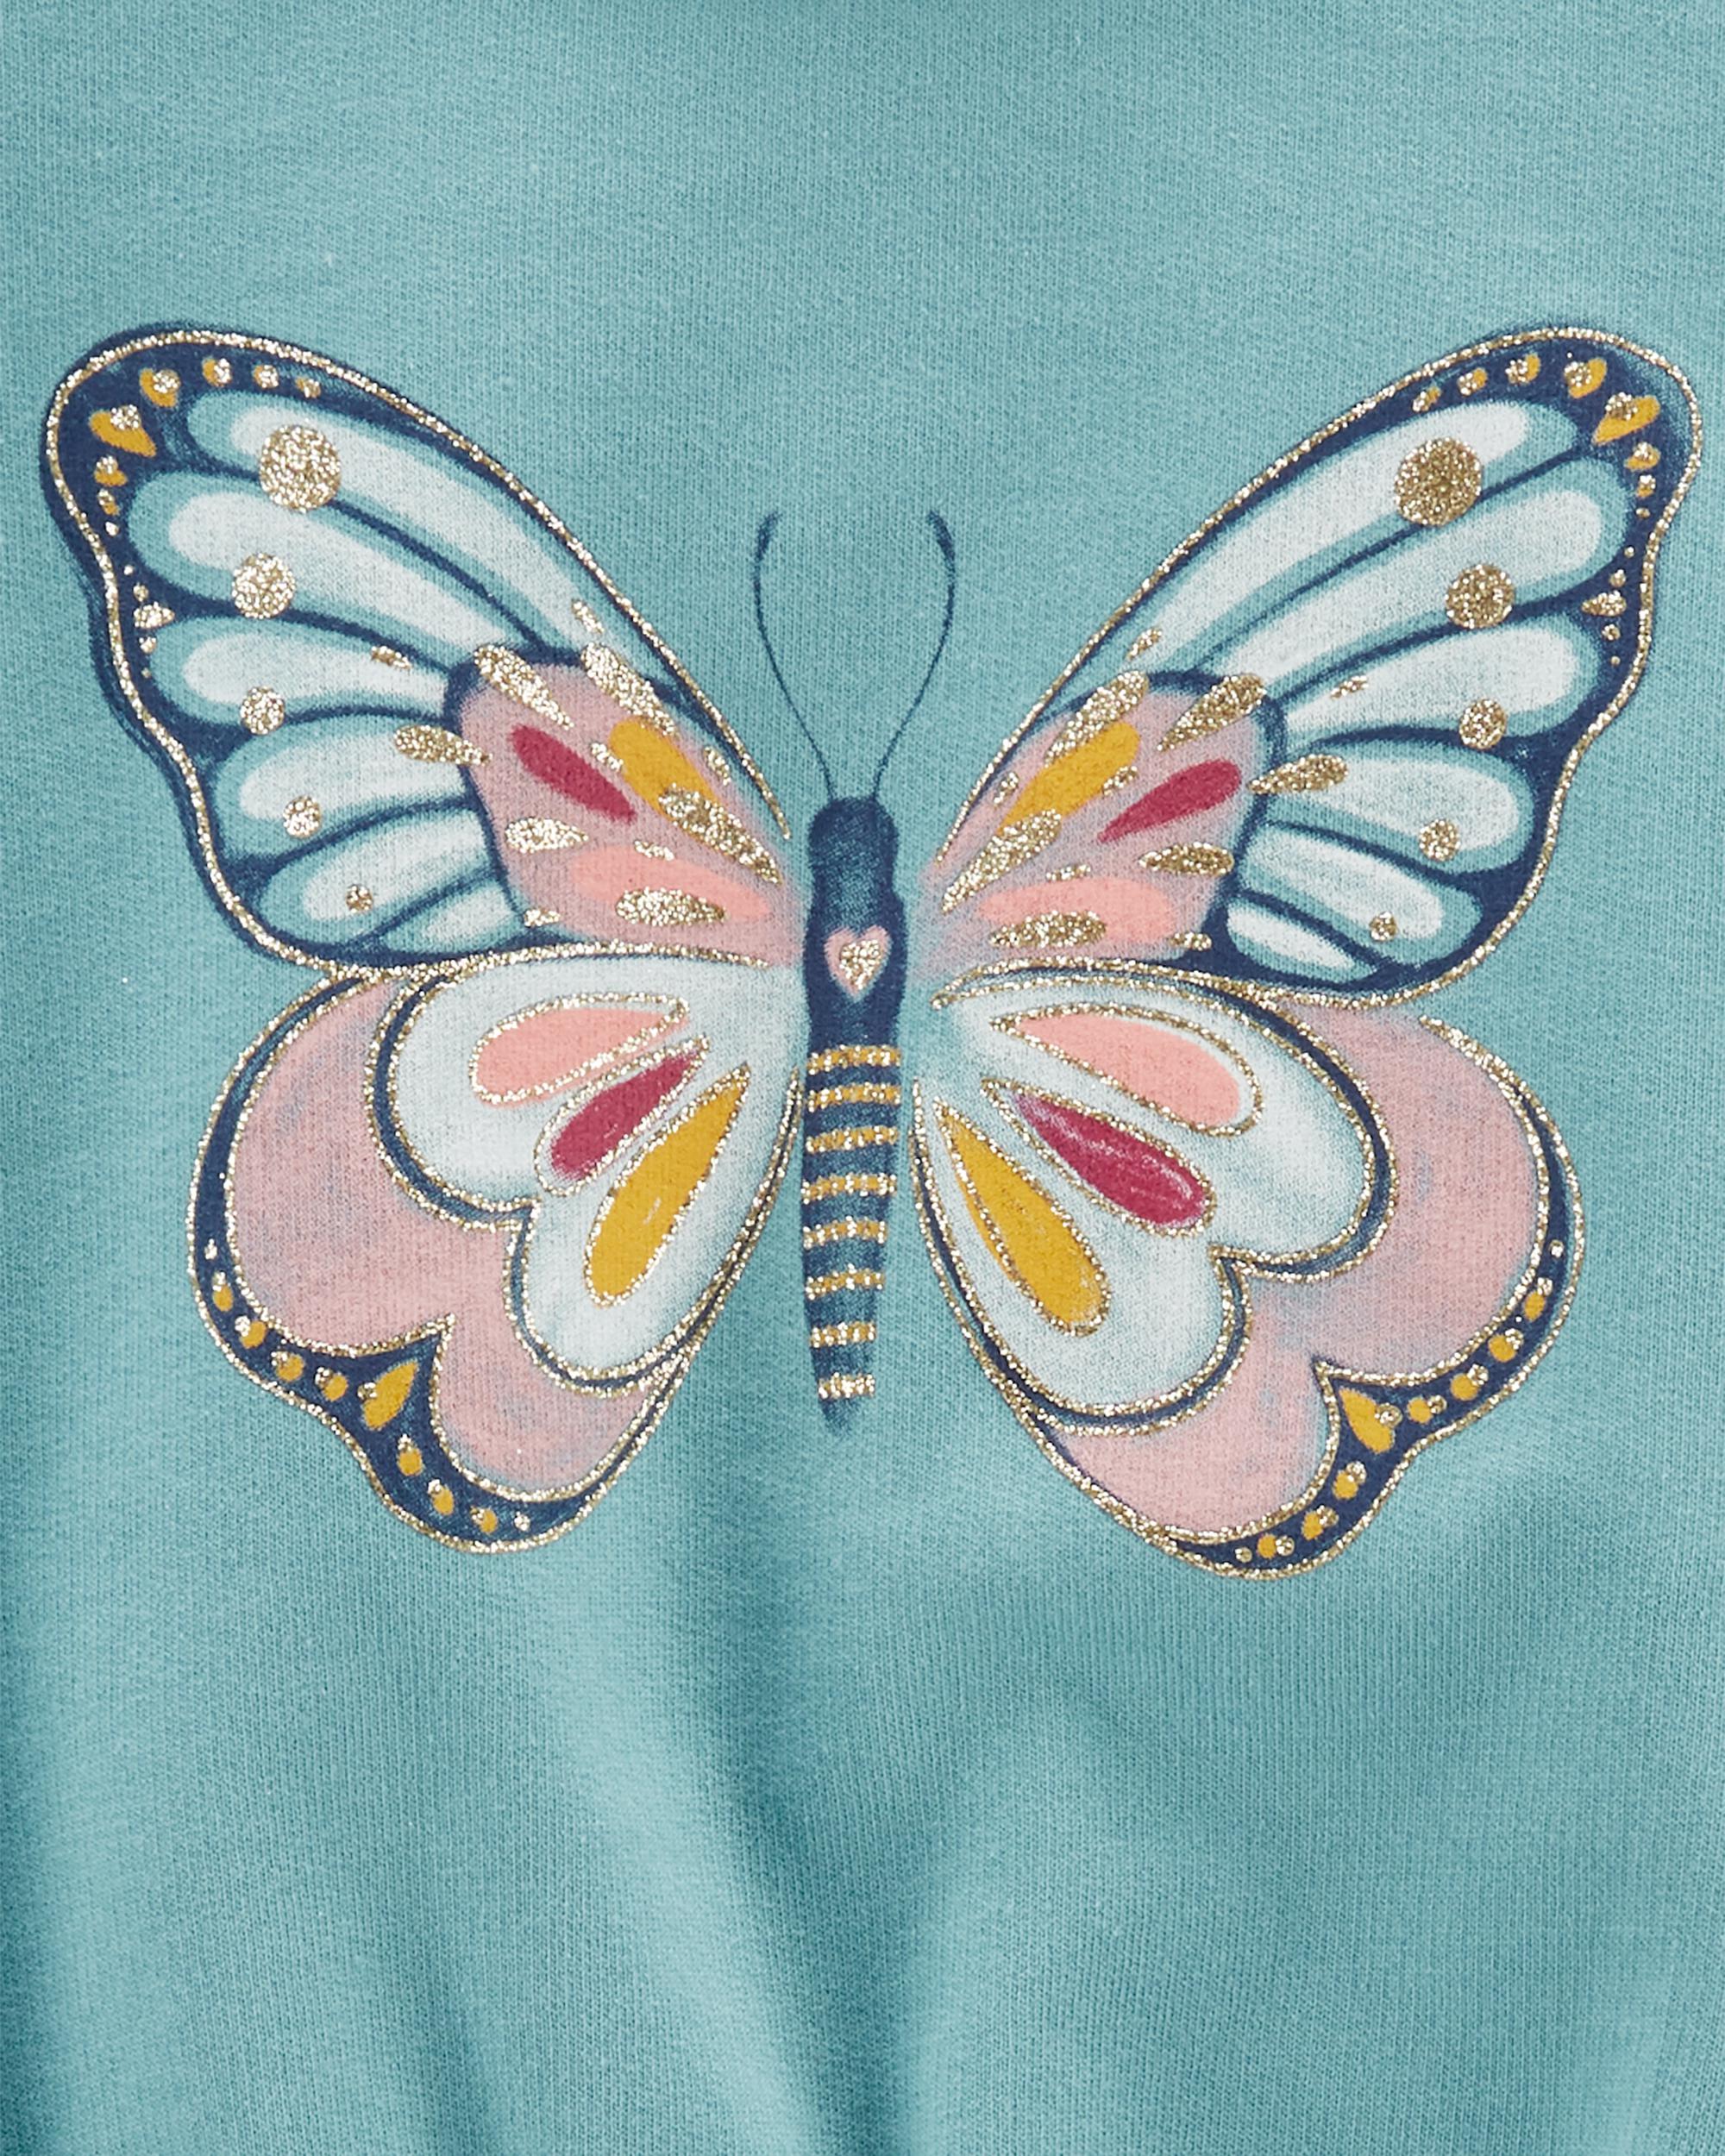 Baby Butterfly Crewneck